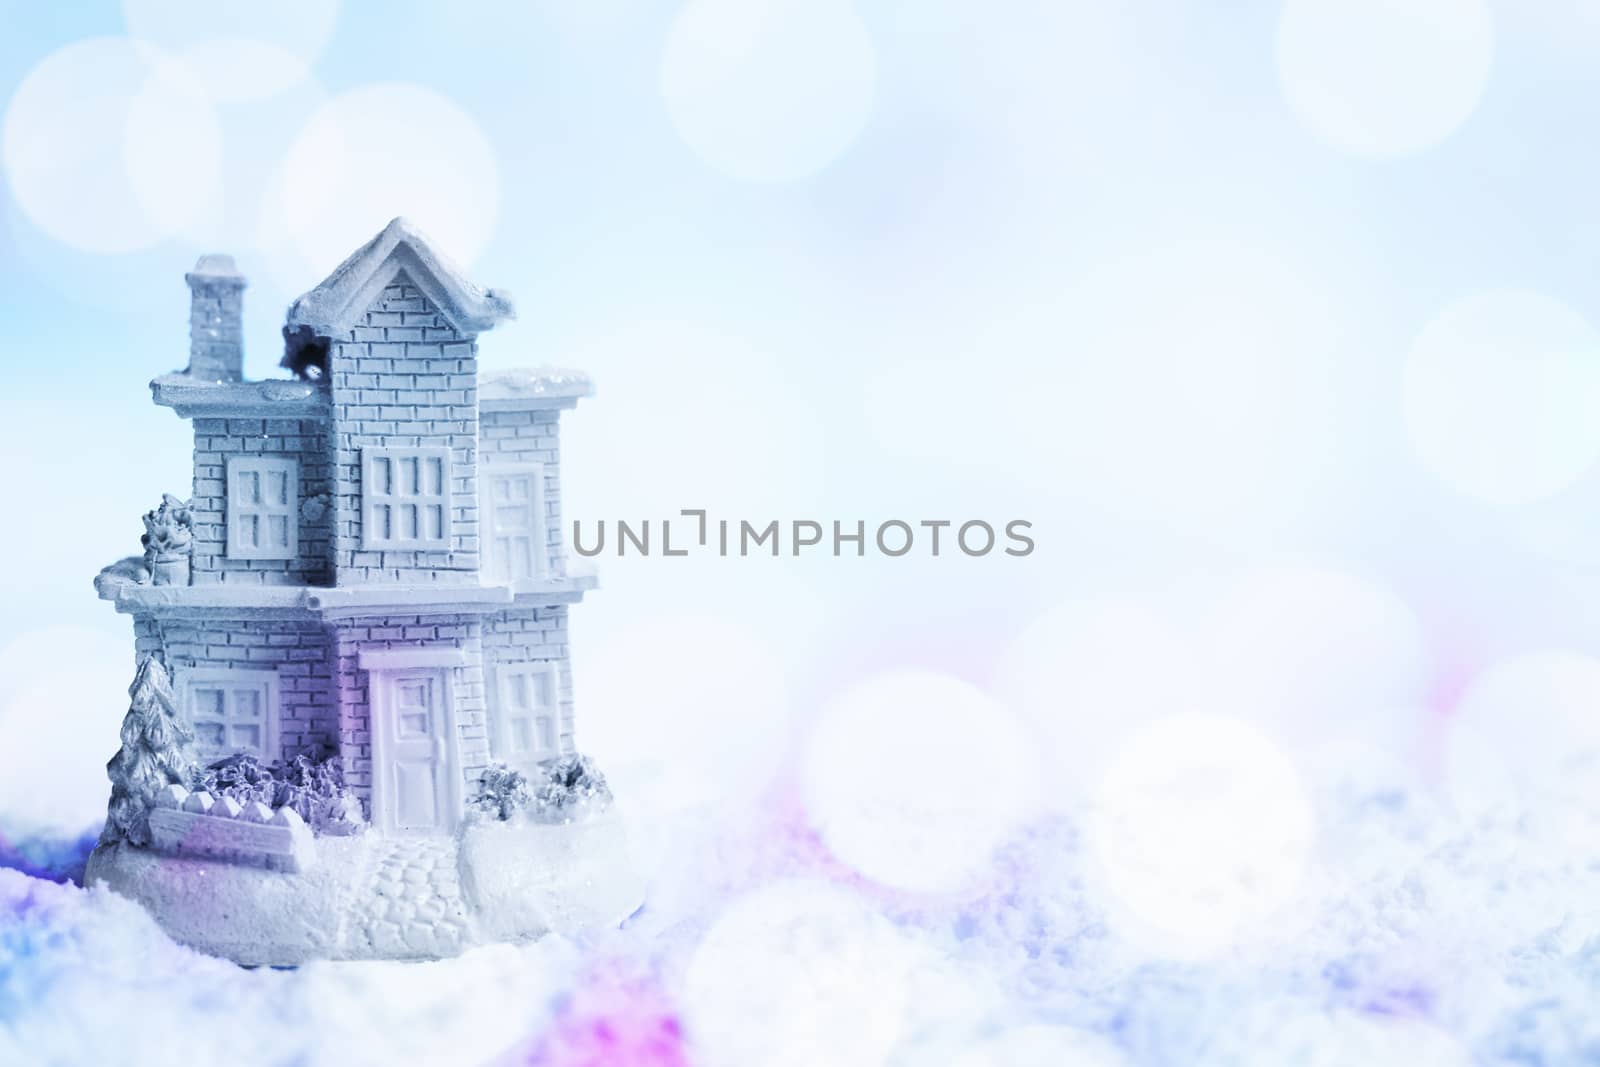 Snowy house in the snow with colorful bokeh effect. by GraffiTimi